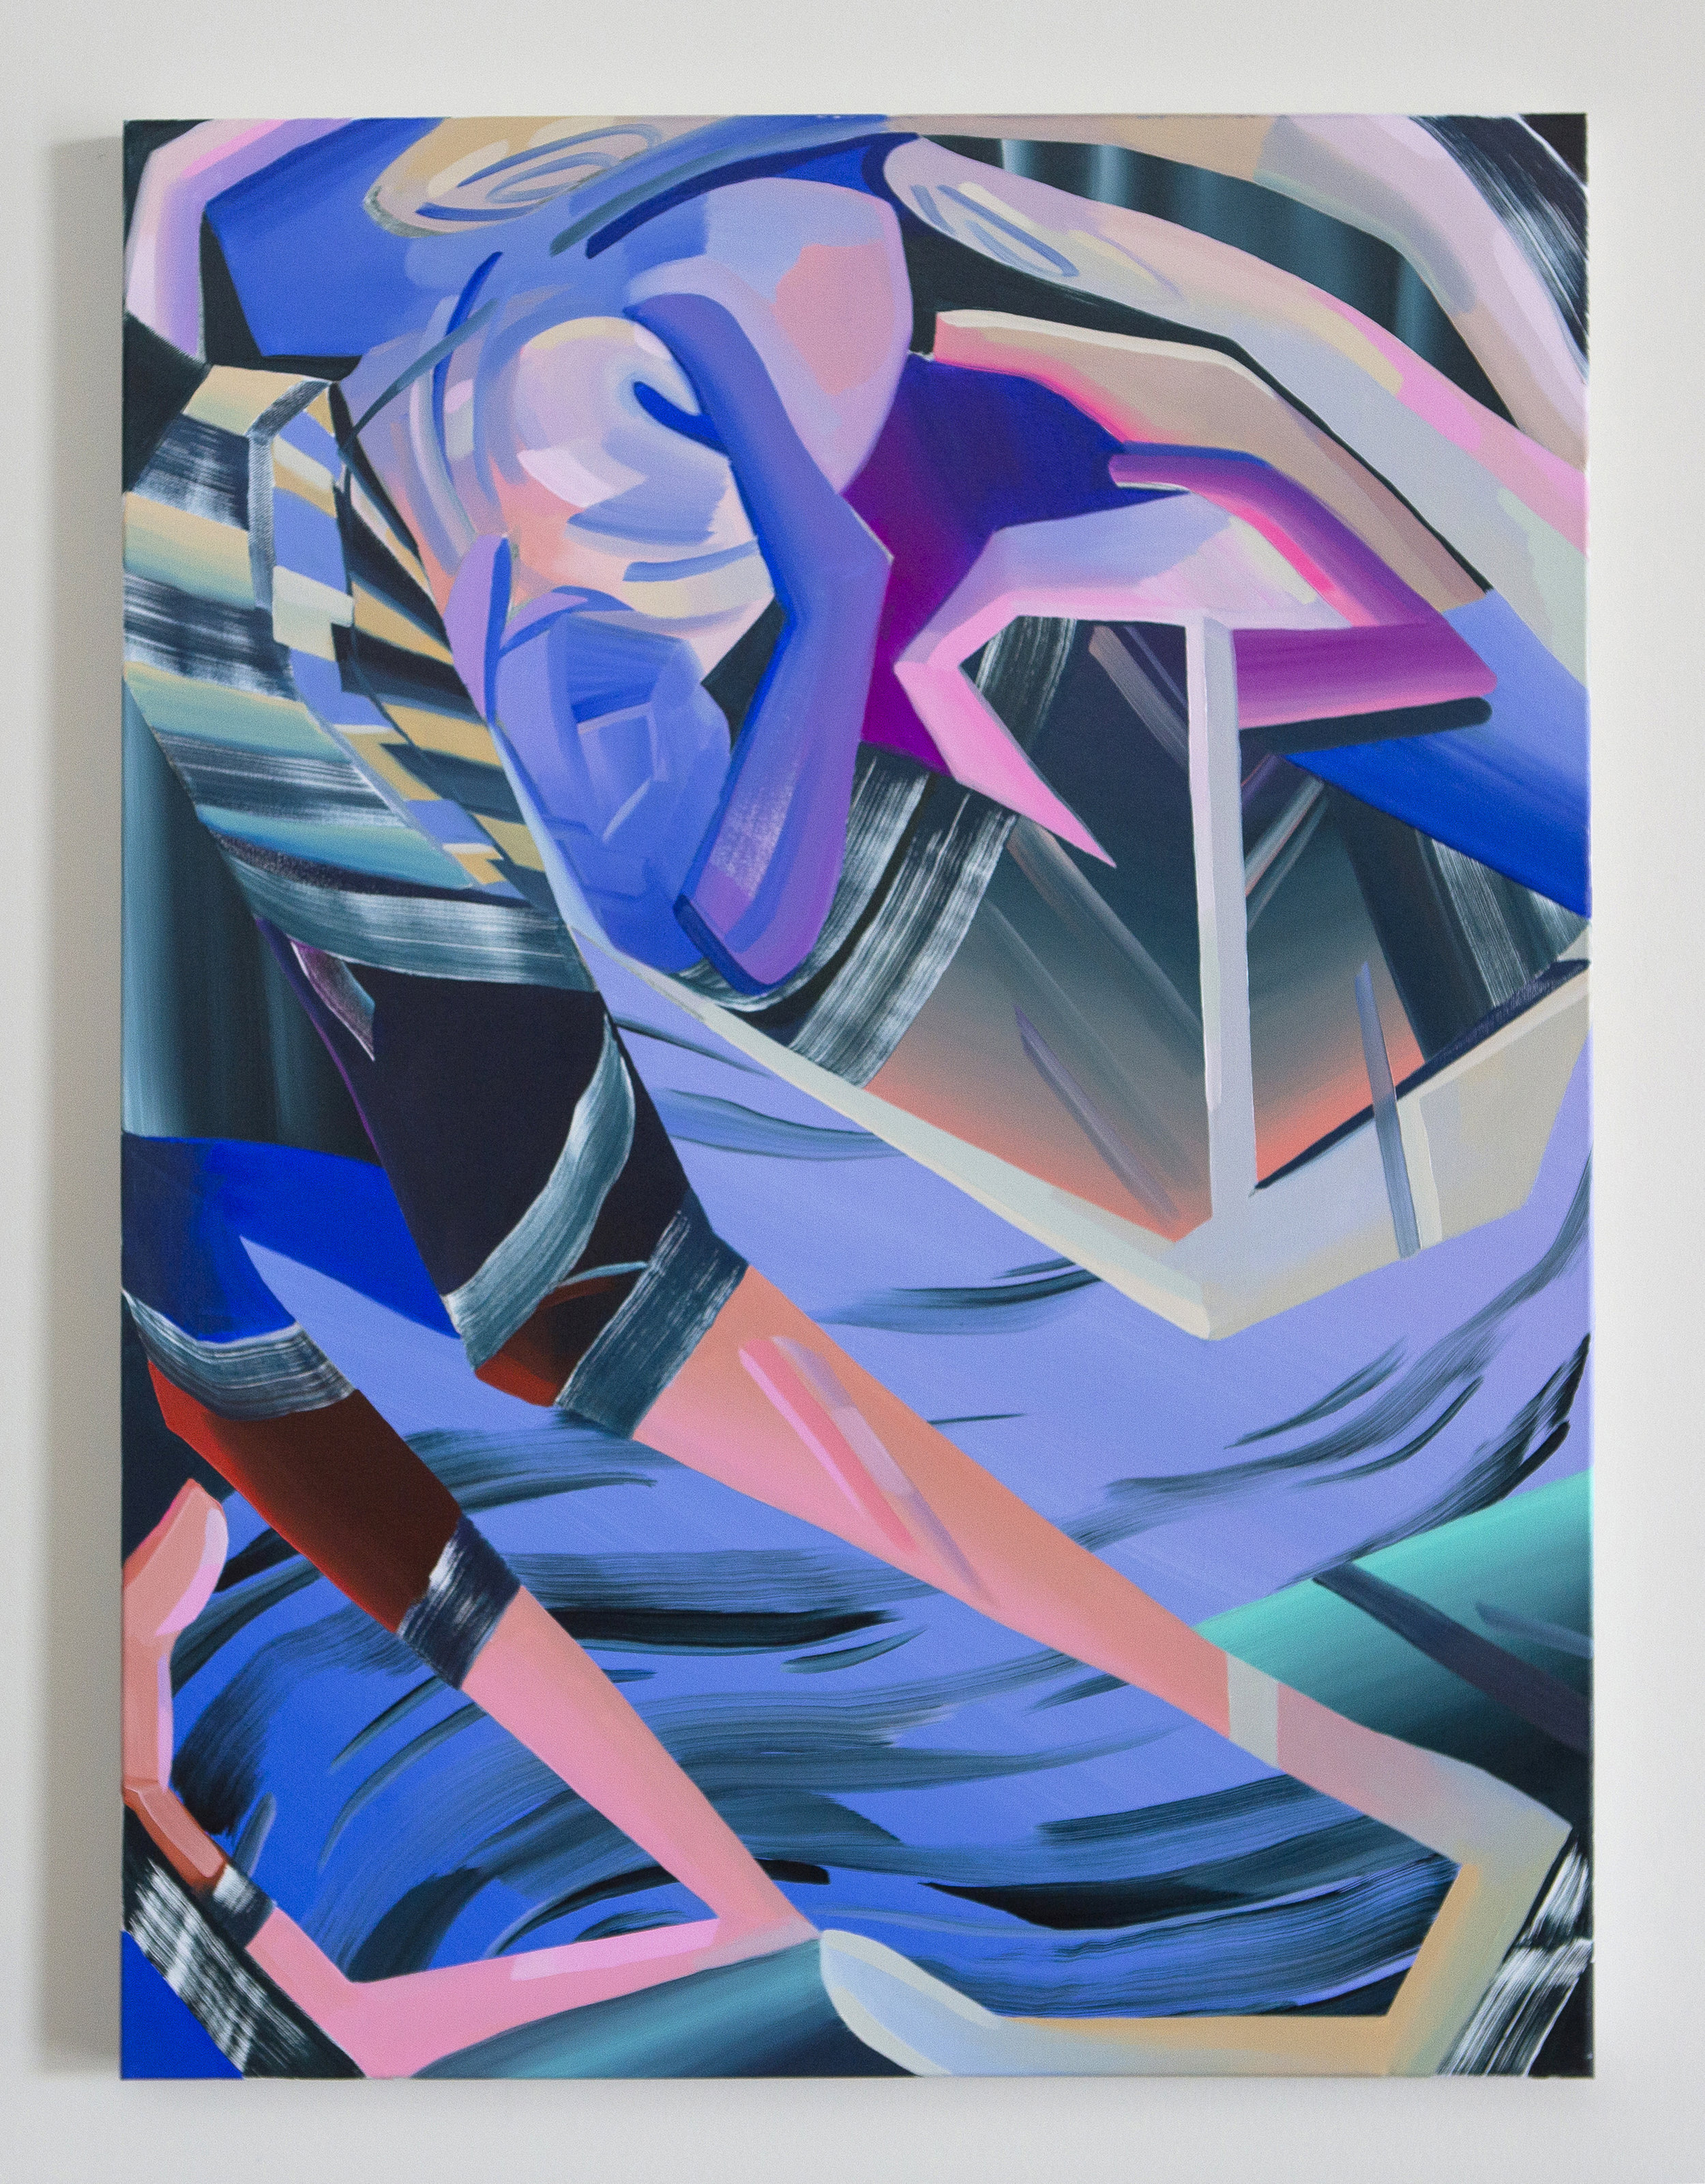 Night Walking (For Durga), 2017, oil on canvas, 48 x 36 inches